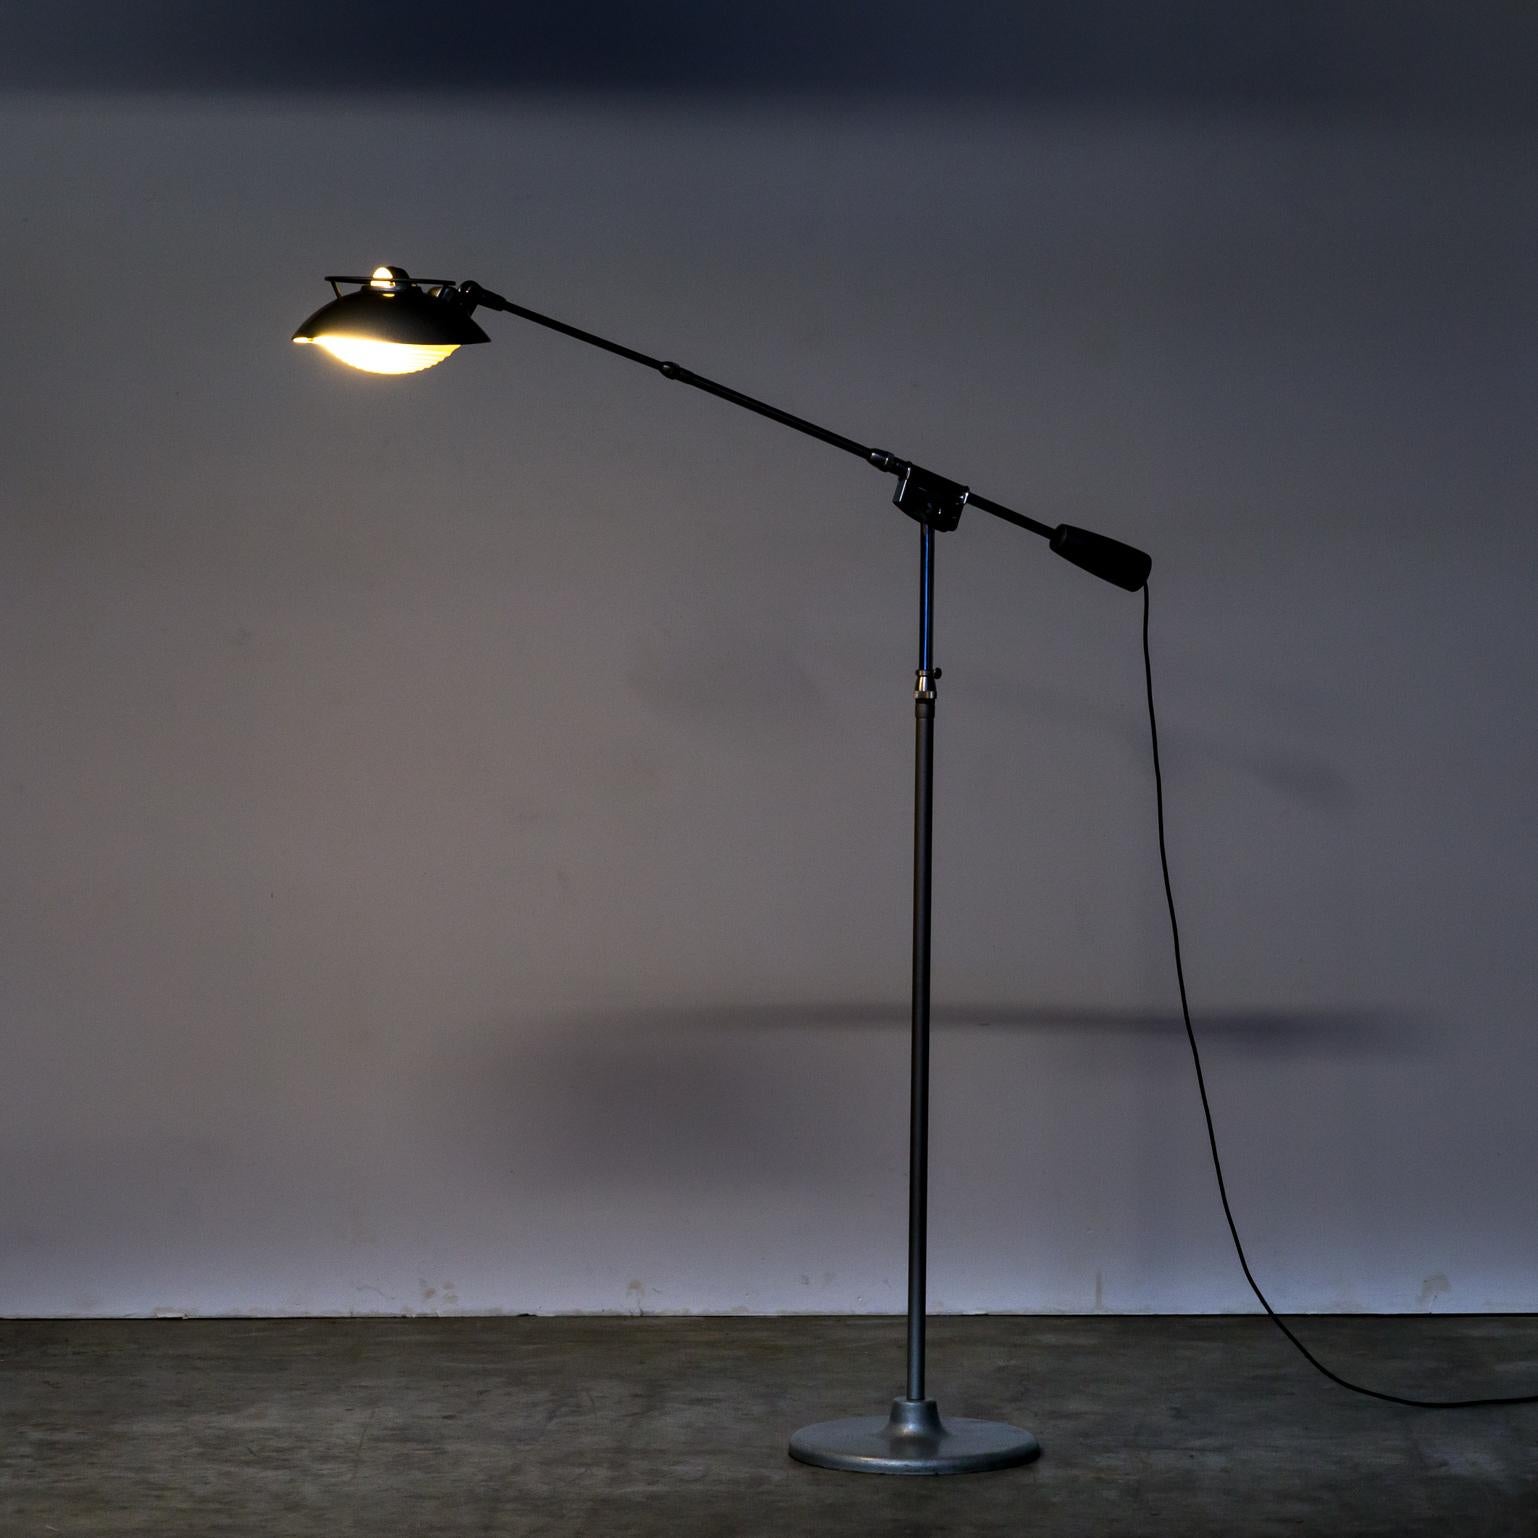 1950s Ferdinand Solère floor lamp ‘model 219S’ for Solere. The Solère floor lamp 219S was designed in 1950 by the French designer Ferdinand Solère. The light is also known as the “light machine”. This Industrial lamp has a telescopic arm and is